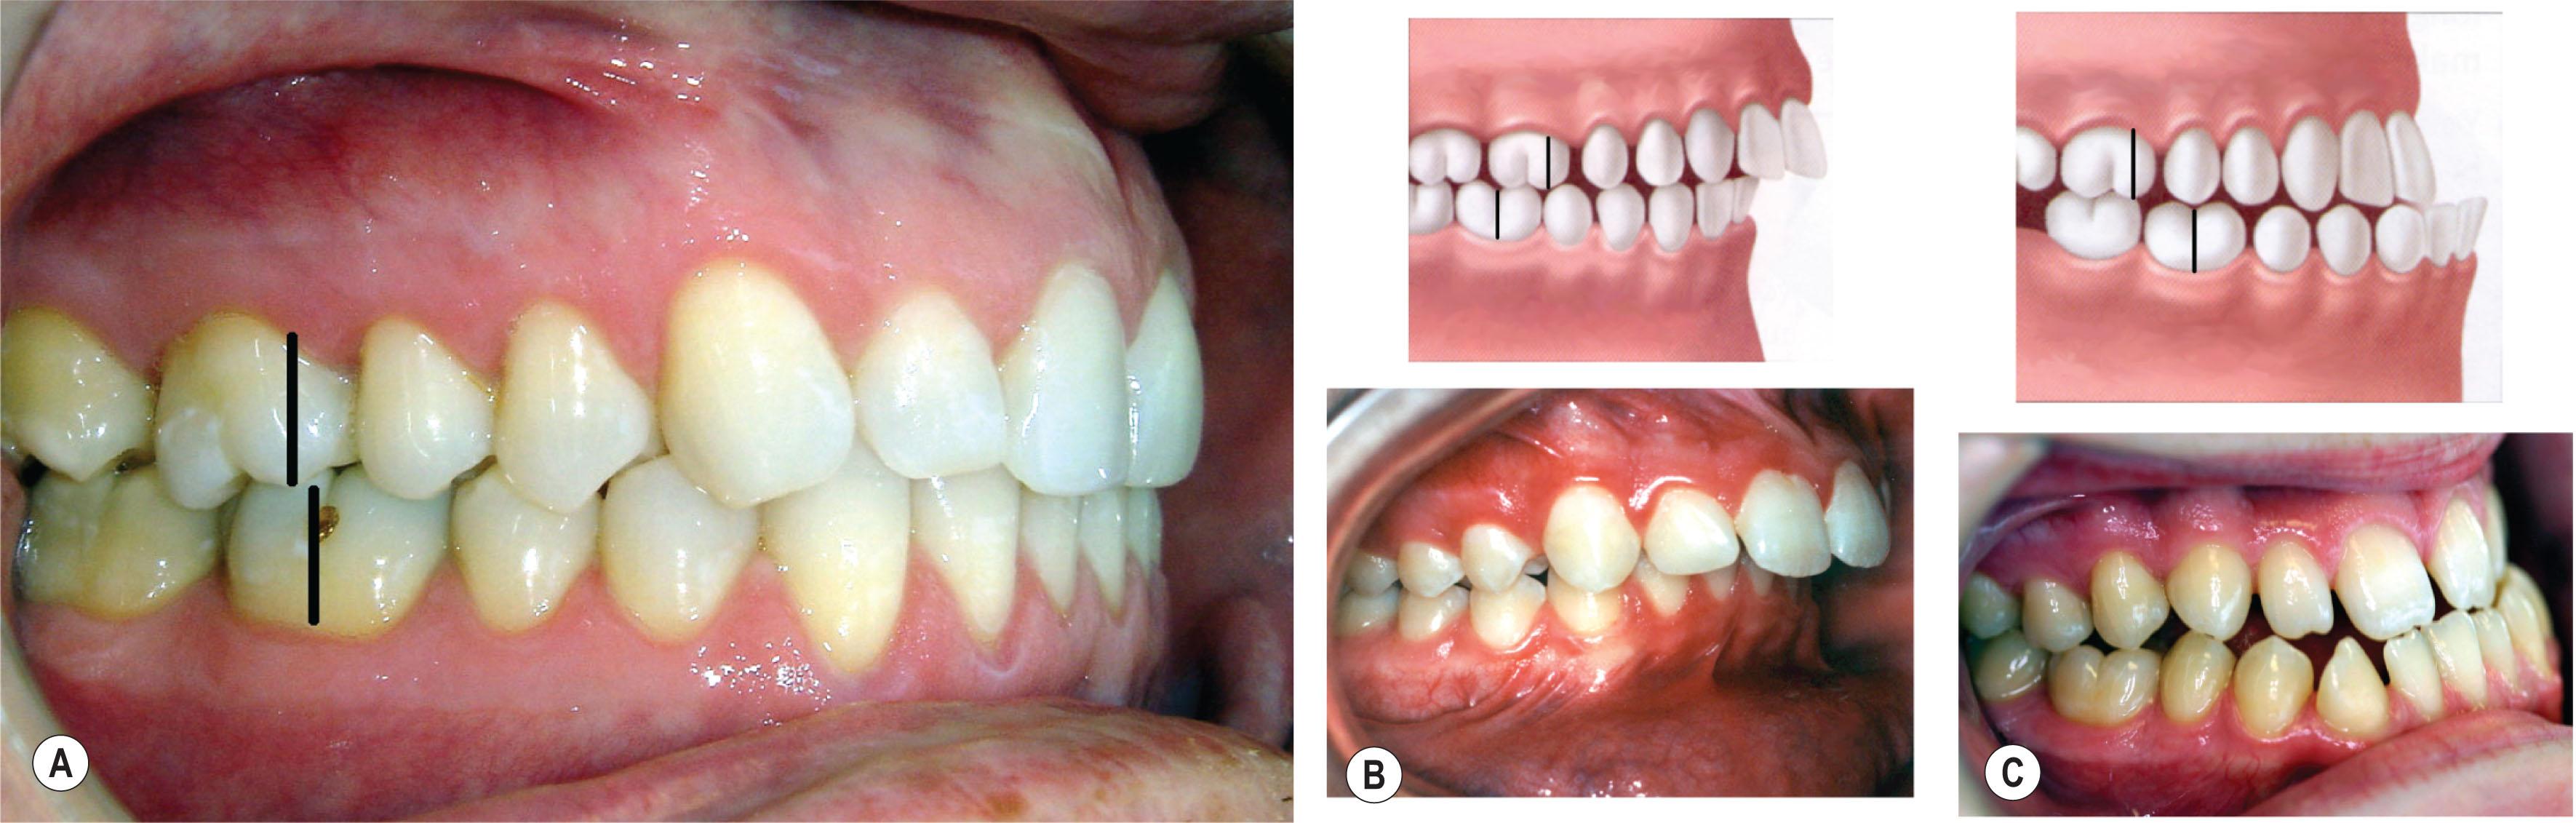 Figure 21.11.1, (A) Class I occlusion has a normal molar relationship. (B) Class II malocclusion is characterized by the mesiobuccal cusp of the maxillary first molar sitting mesial to the mesiobuccal groove of the mandibular first molar. (C) Class III malocclusion is characterized by the mesiobuccal cusp of the maxillary first molar sitting distal to the mesiobuccal groove of the mandibular first molar.